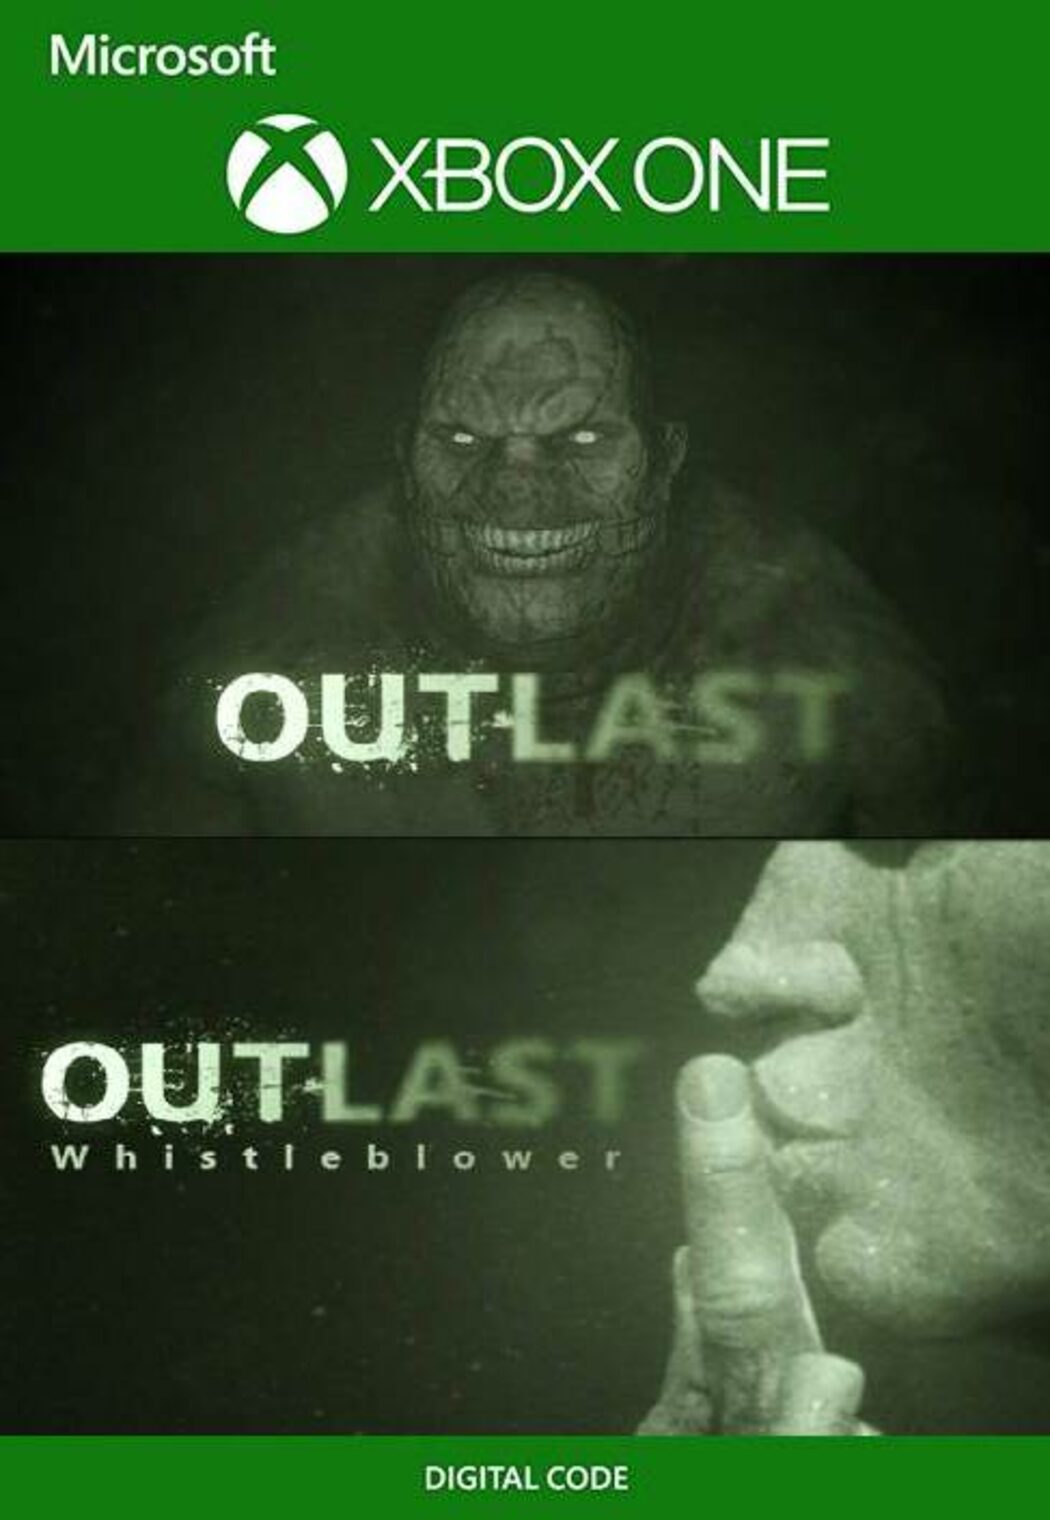 Outlast the murkoff account на русском фото 110